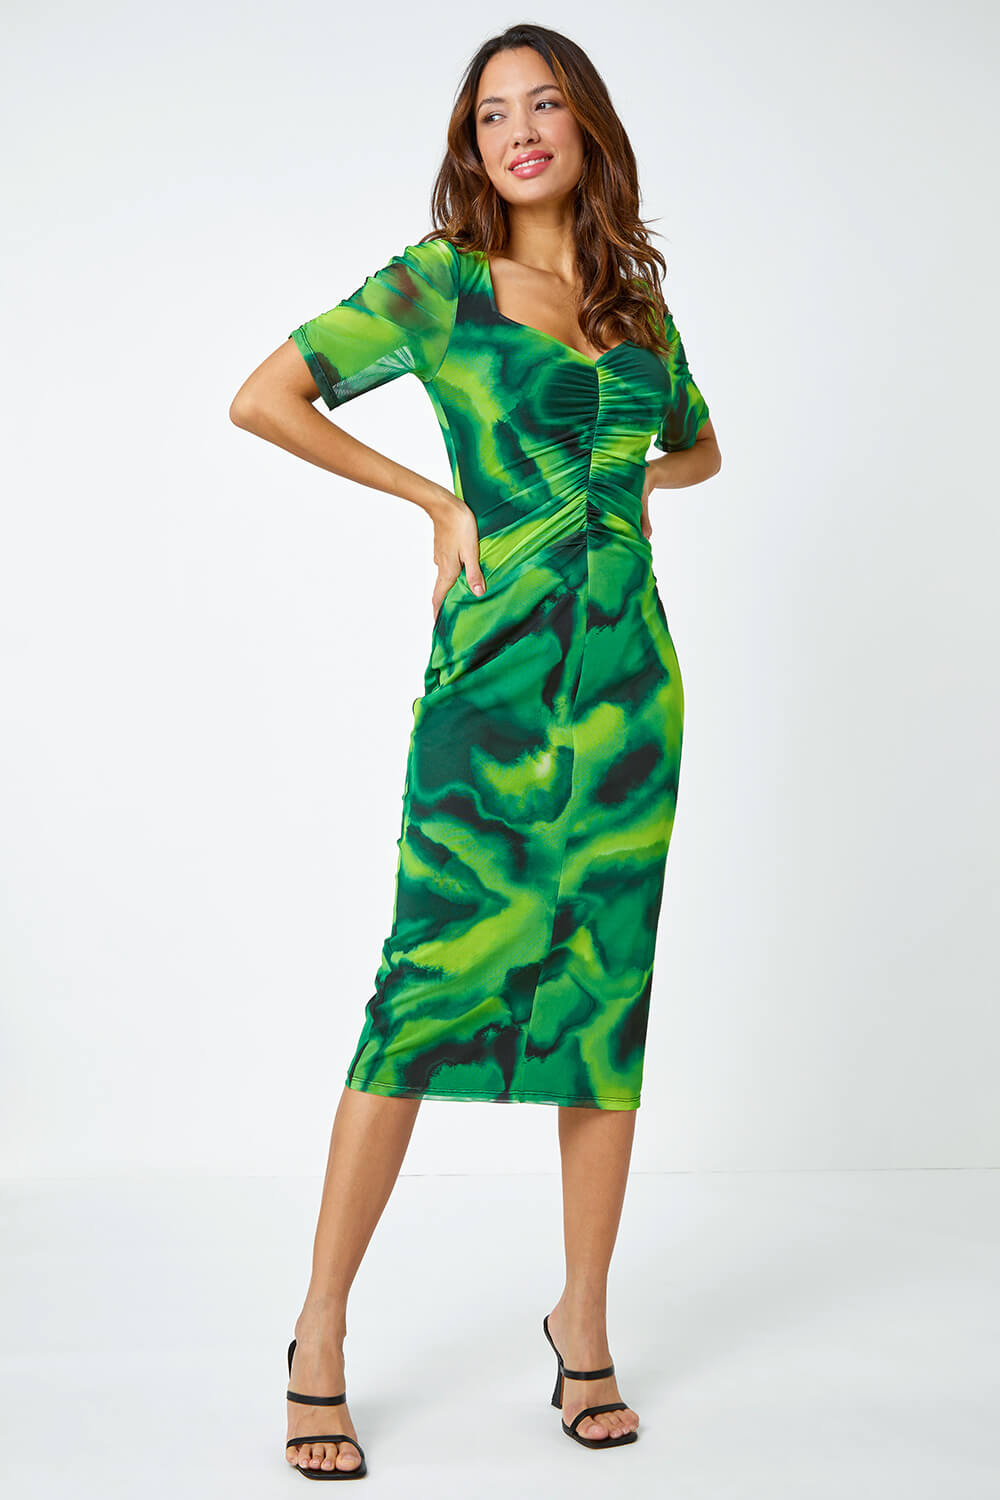 Green Marble Print Stretch Mesh Ruched Dress, Image 2 of 5